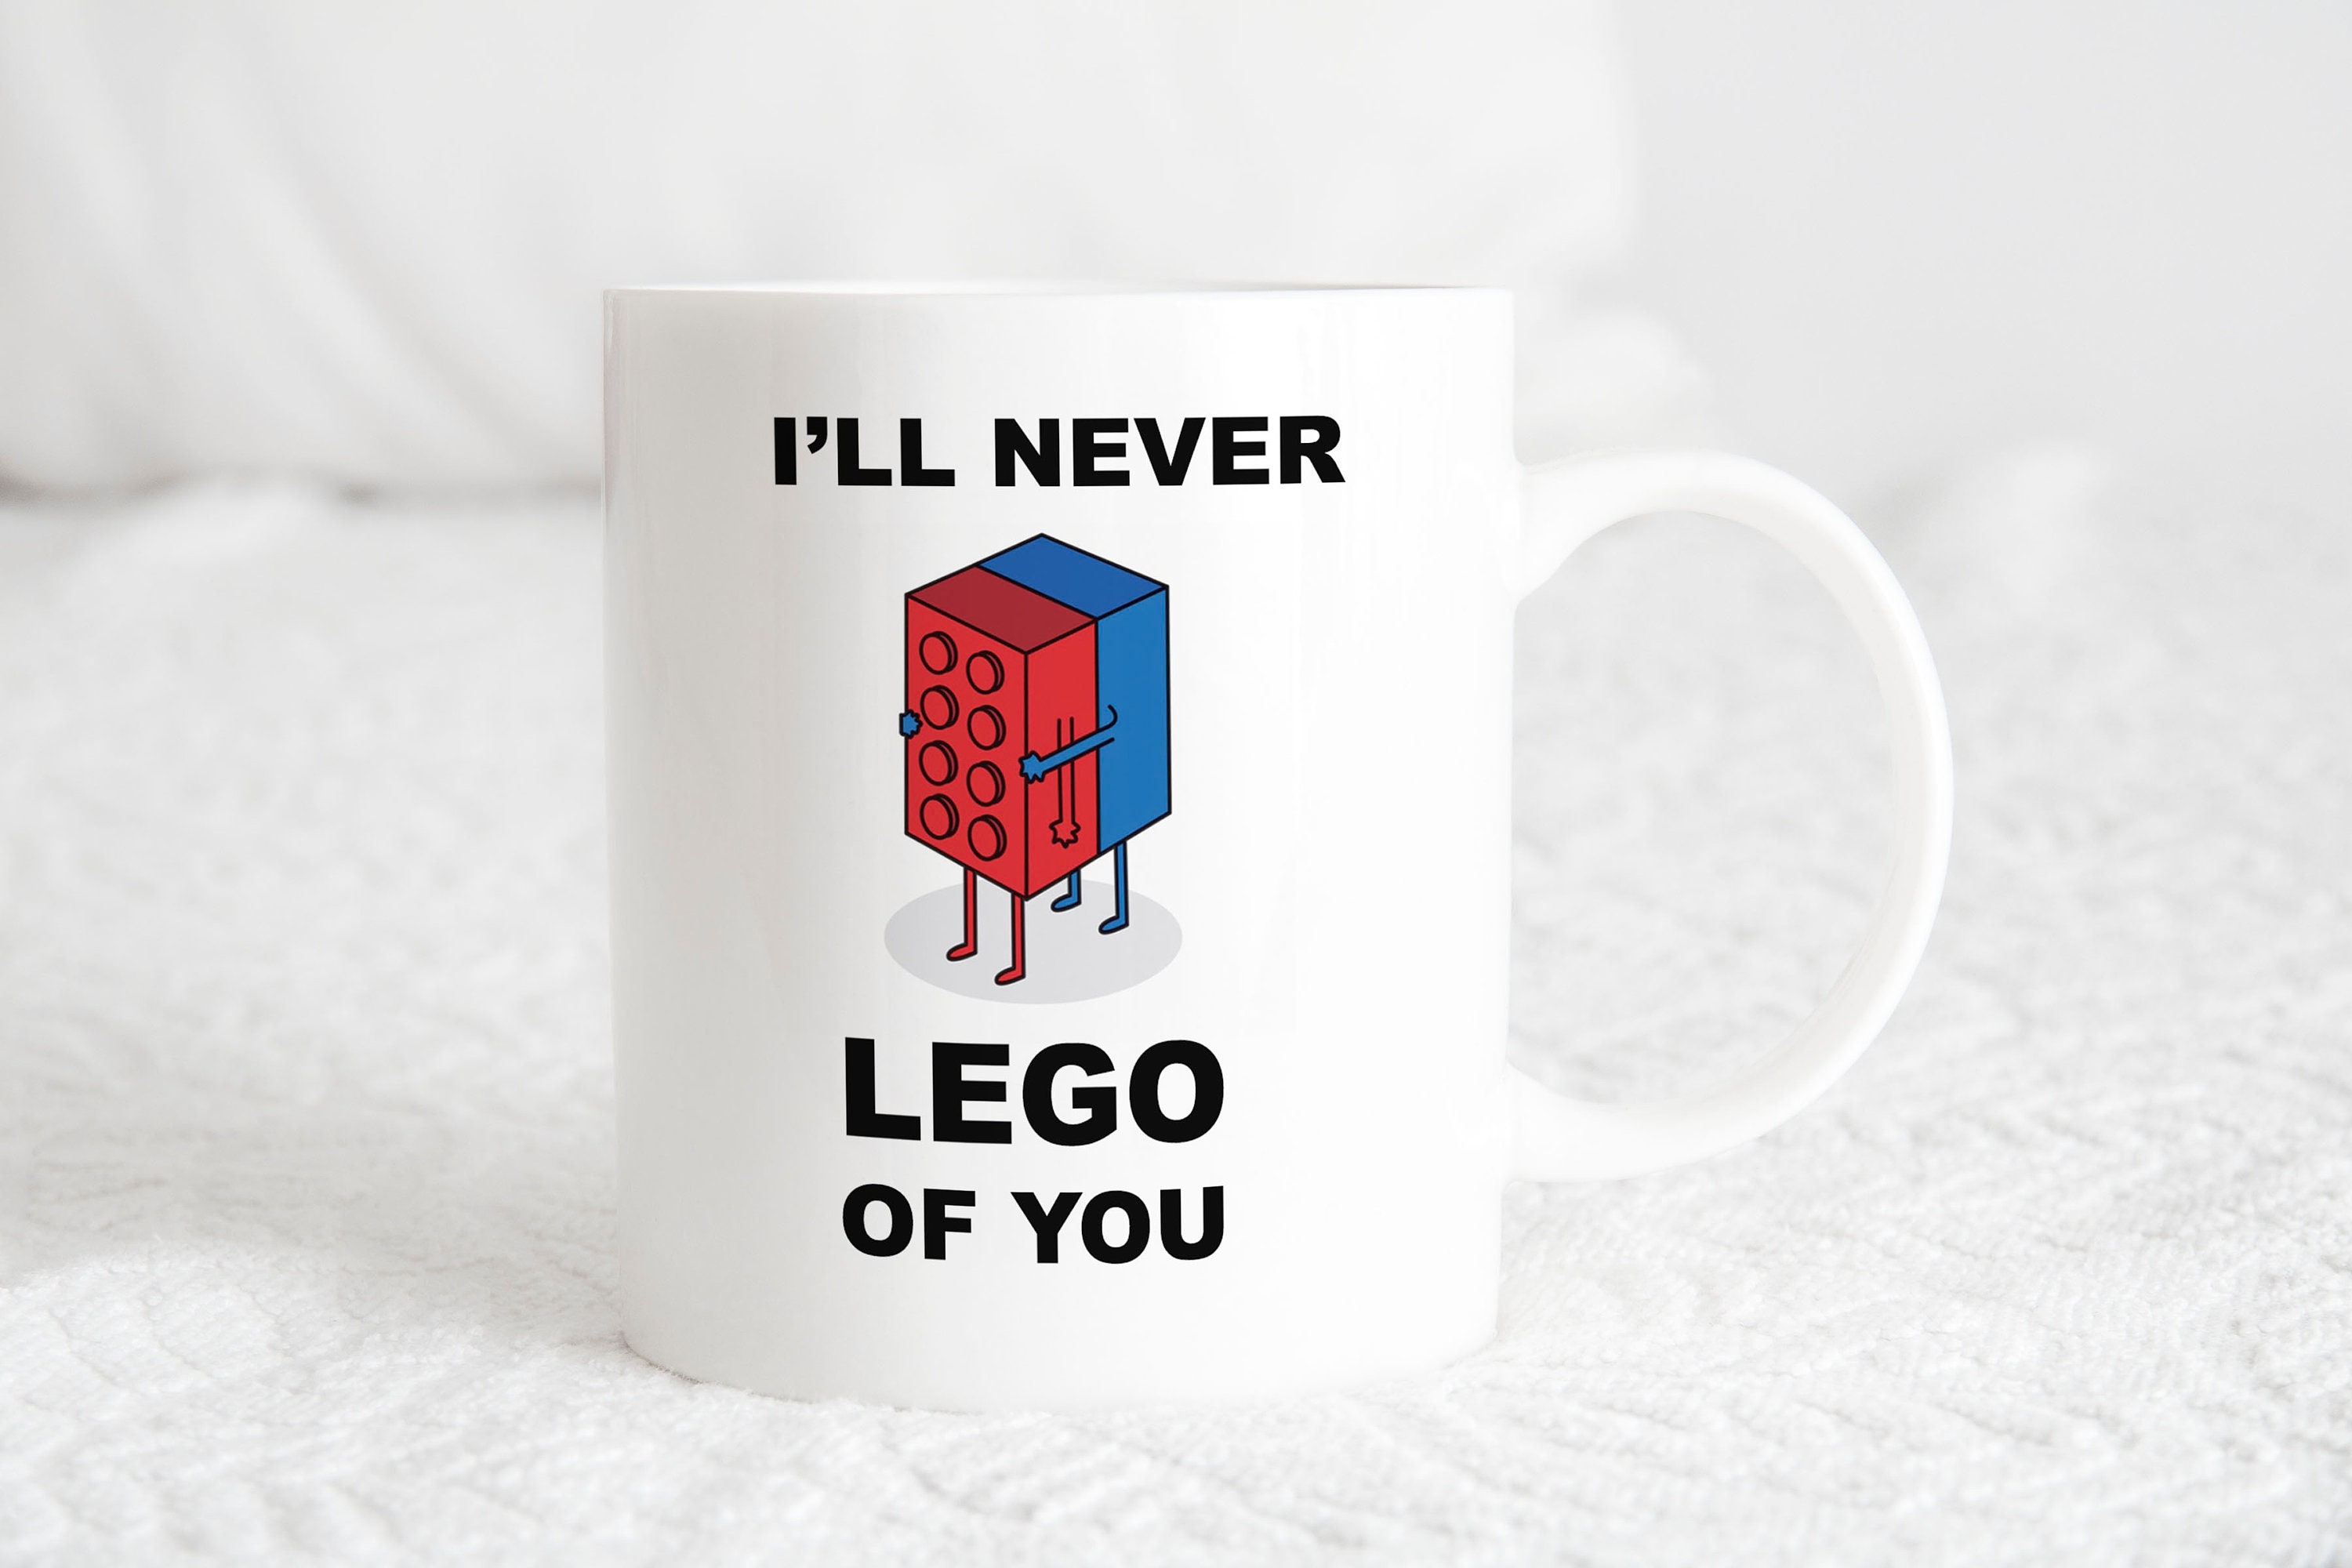 I Would Step on a Lego for You Mug, Lego Pun Gift, Never Lego, Boyfriend  Girlfriend Lego Lover Present, Anniversary Valentine's Day Unique 